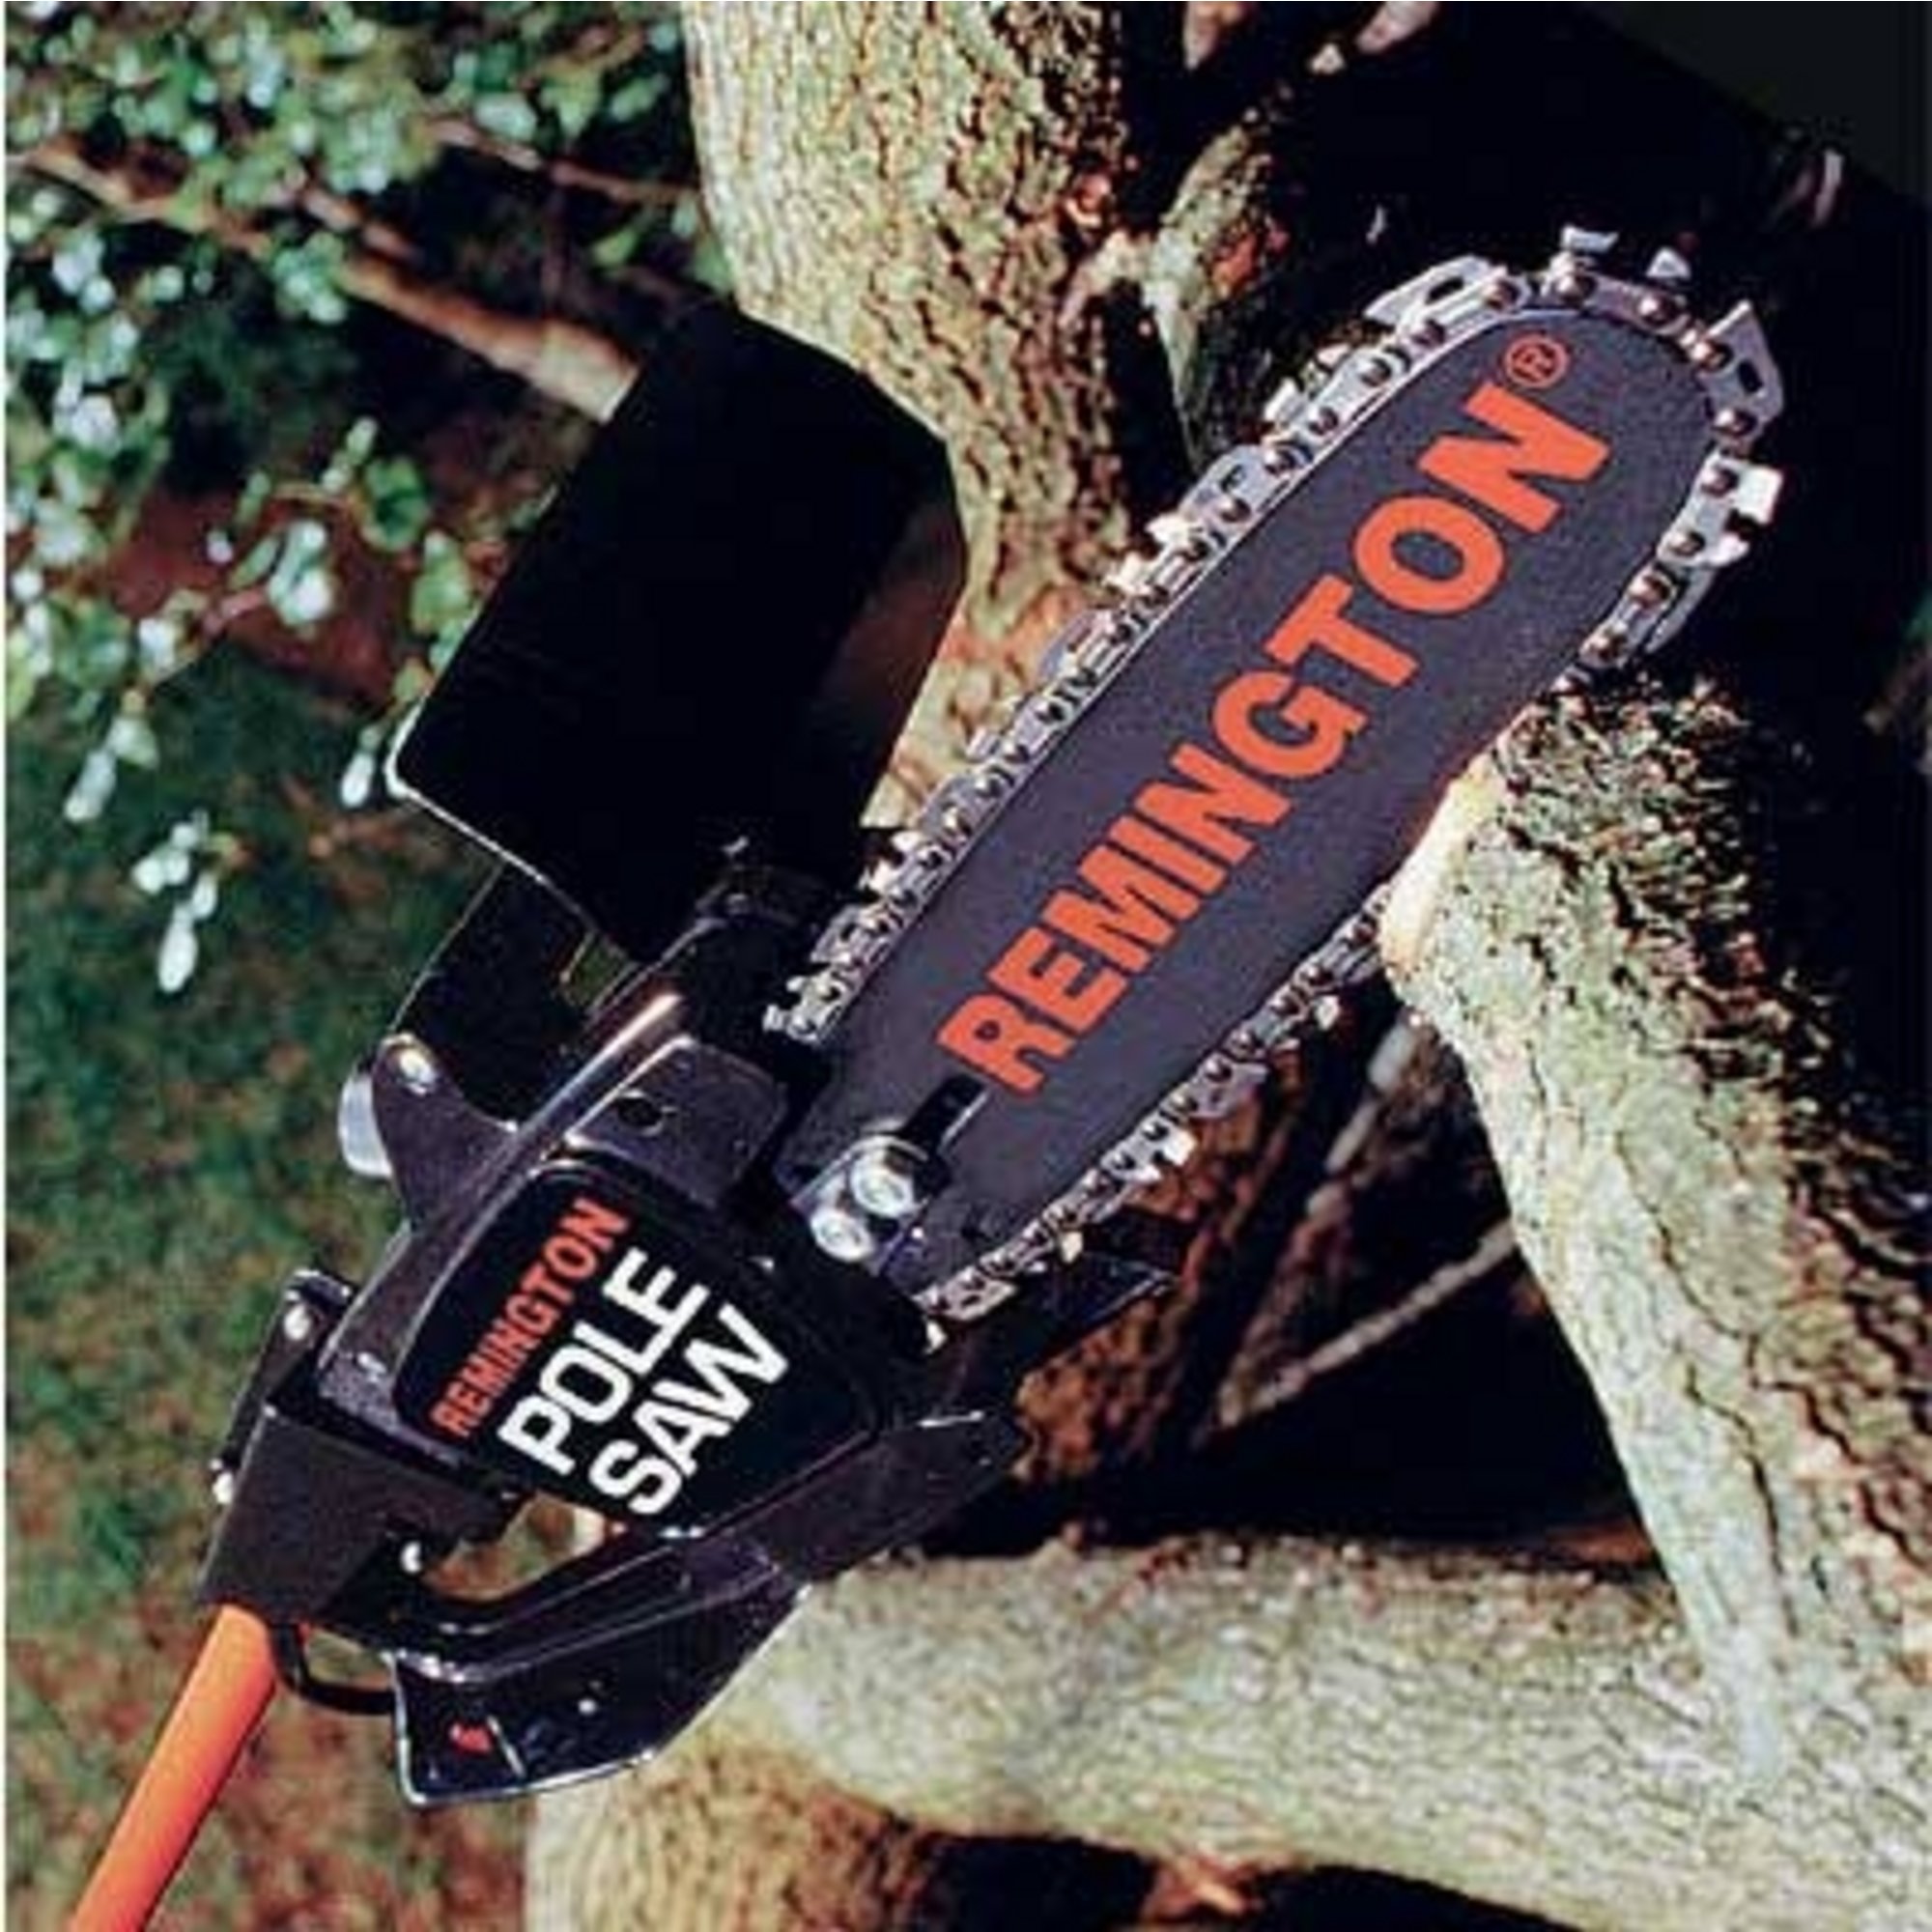 8 Amp 10 In. 2-In-1 Electric Pole Chainsaw